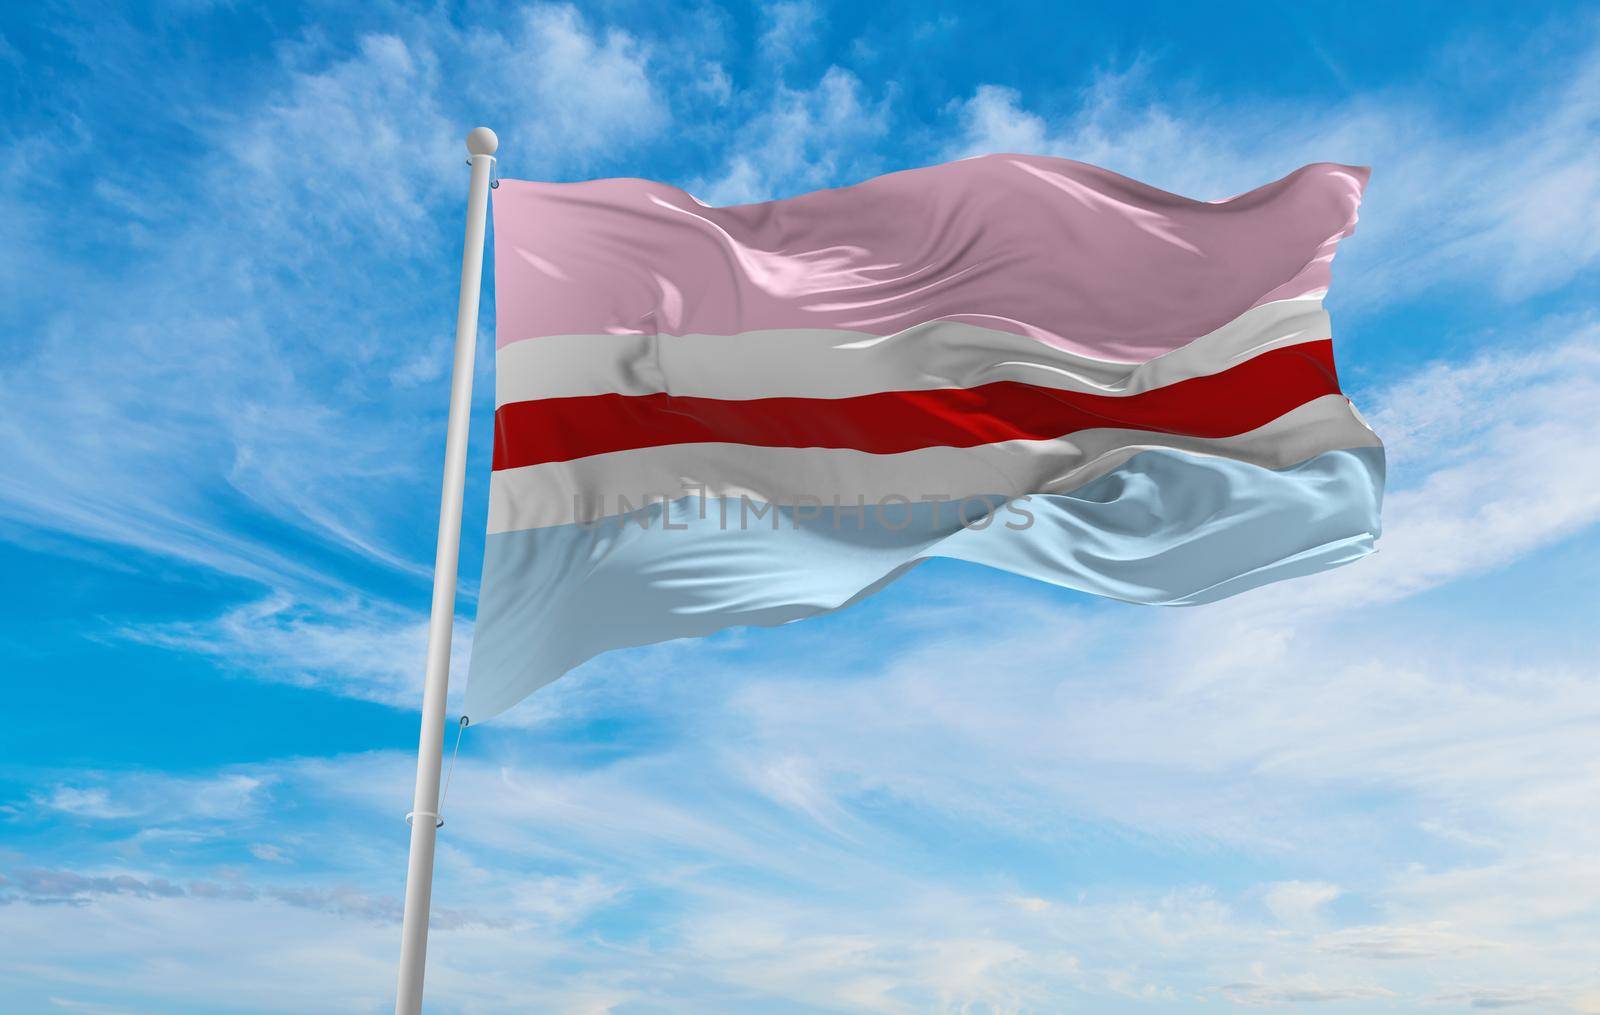 flag of Hijra waving in the wind at cloudy sky. Freedom and love concept. Pride month. activism, community and freedom Concept. Copy space. 3d illustration